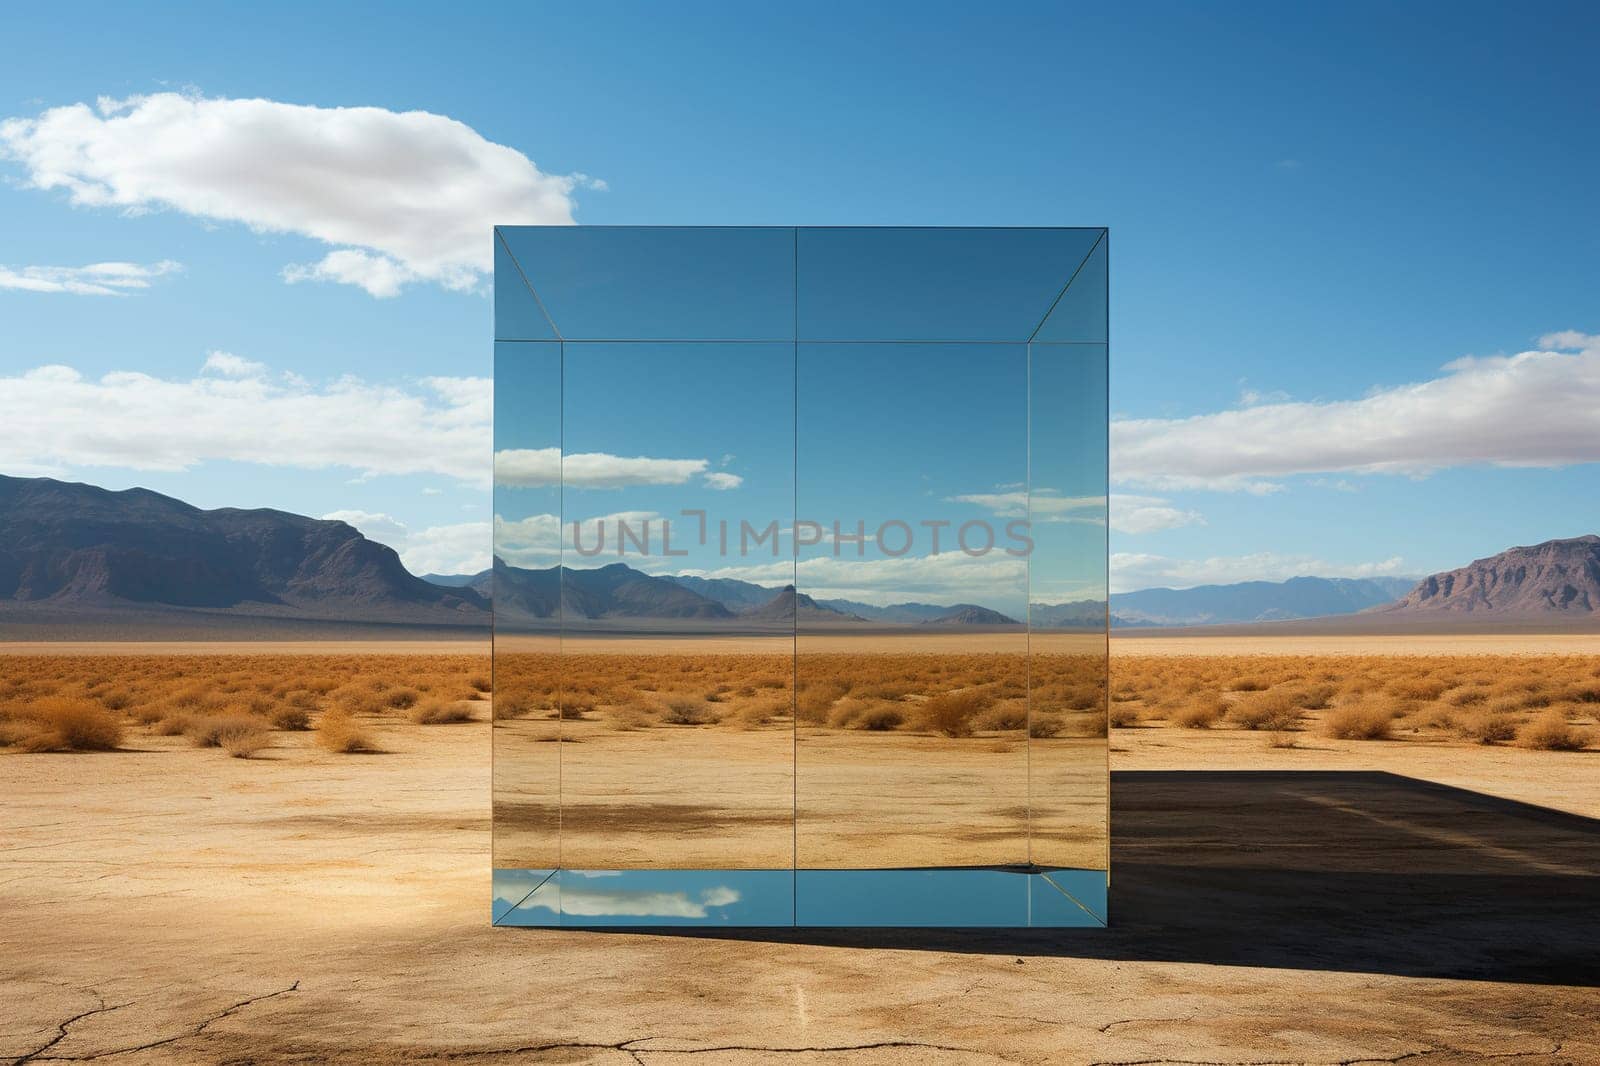 Large mirror in the desert with reflection. Generated by artificial intelligence by Vovmar